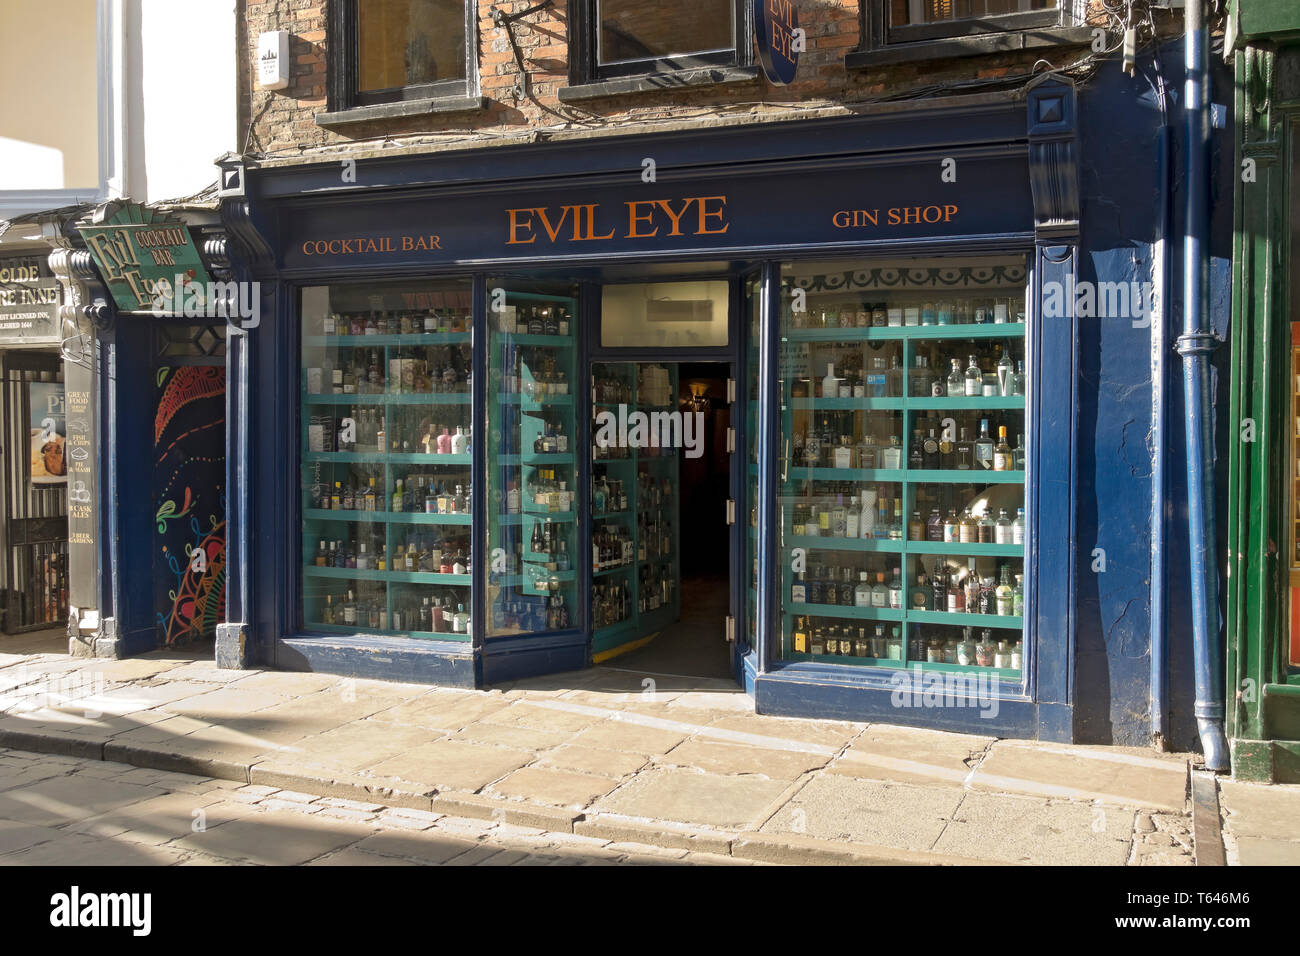 Evil Eye gin shop store and cocktail bar in the town city centre Stonegate York North Yorkshire England UK United Kingdom GB Great Britain Stock Photo